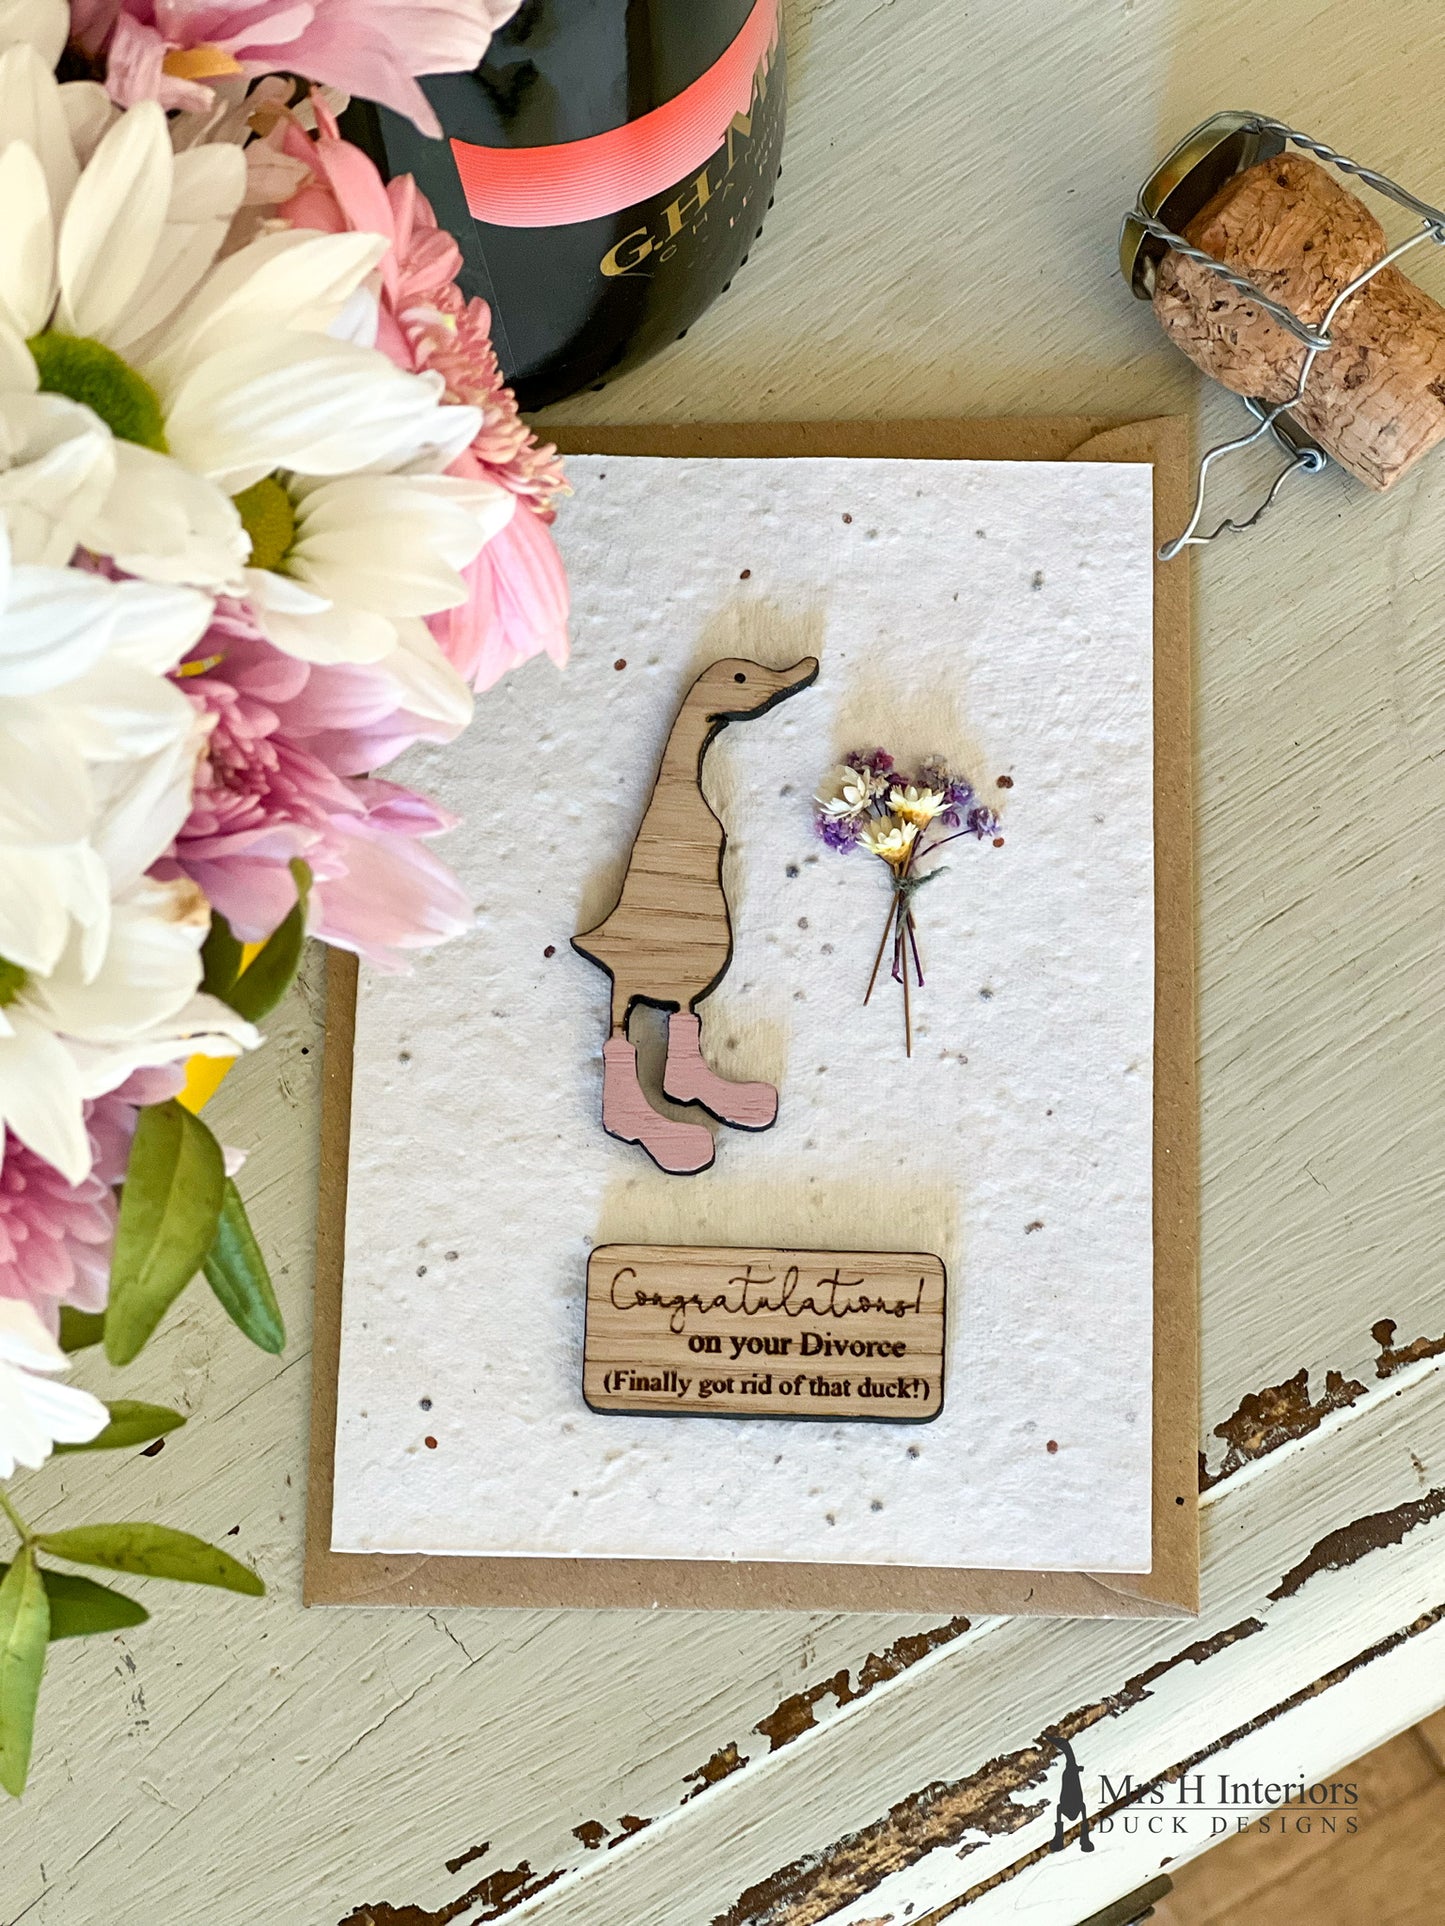 Congratulations on Your Divorce Card - Duck with Flowers - Decorated Wooden Duck in Boots by Mrs H the Duck Lady